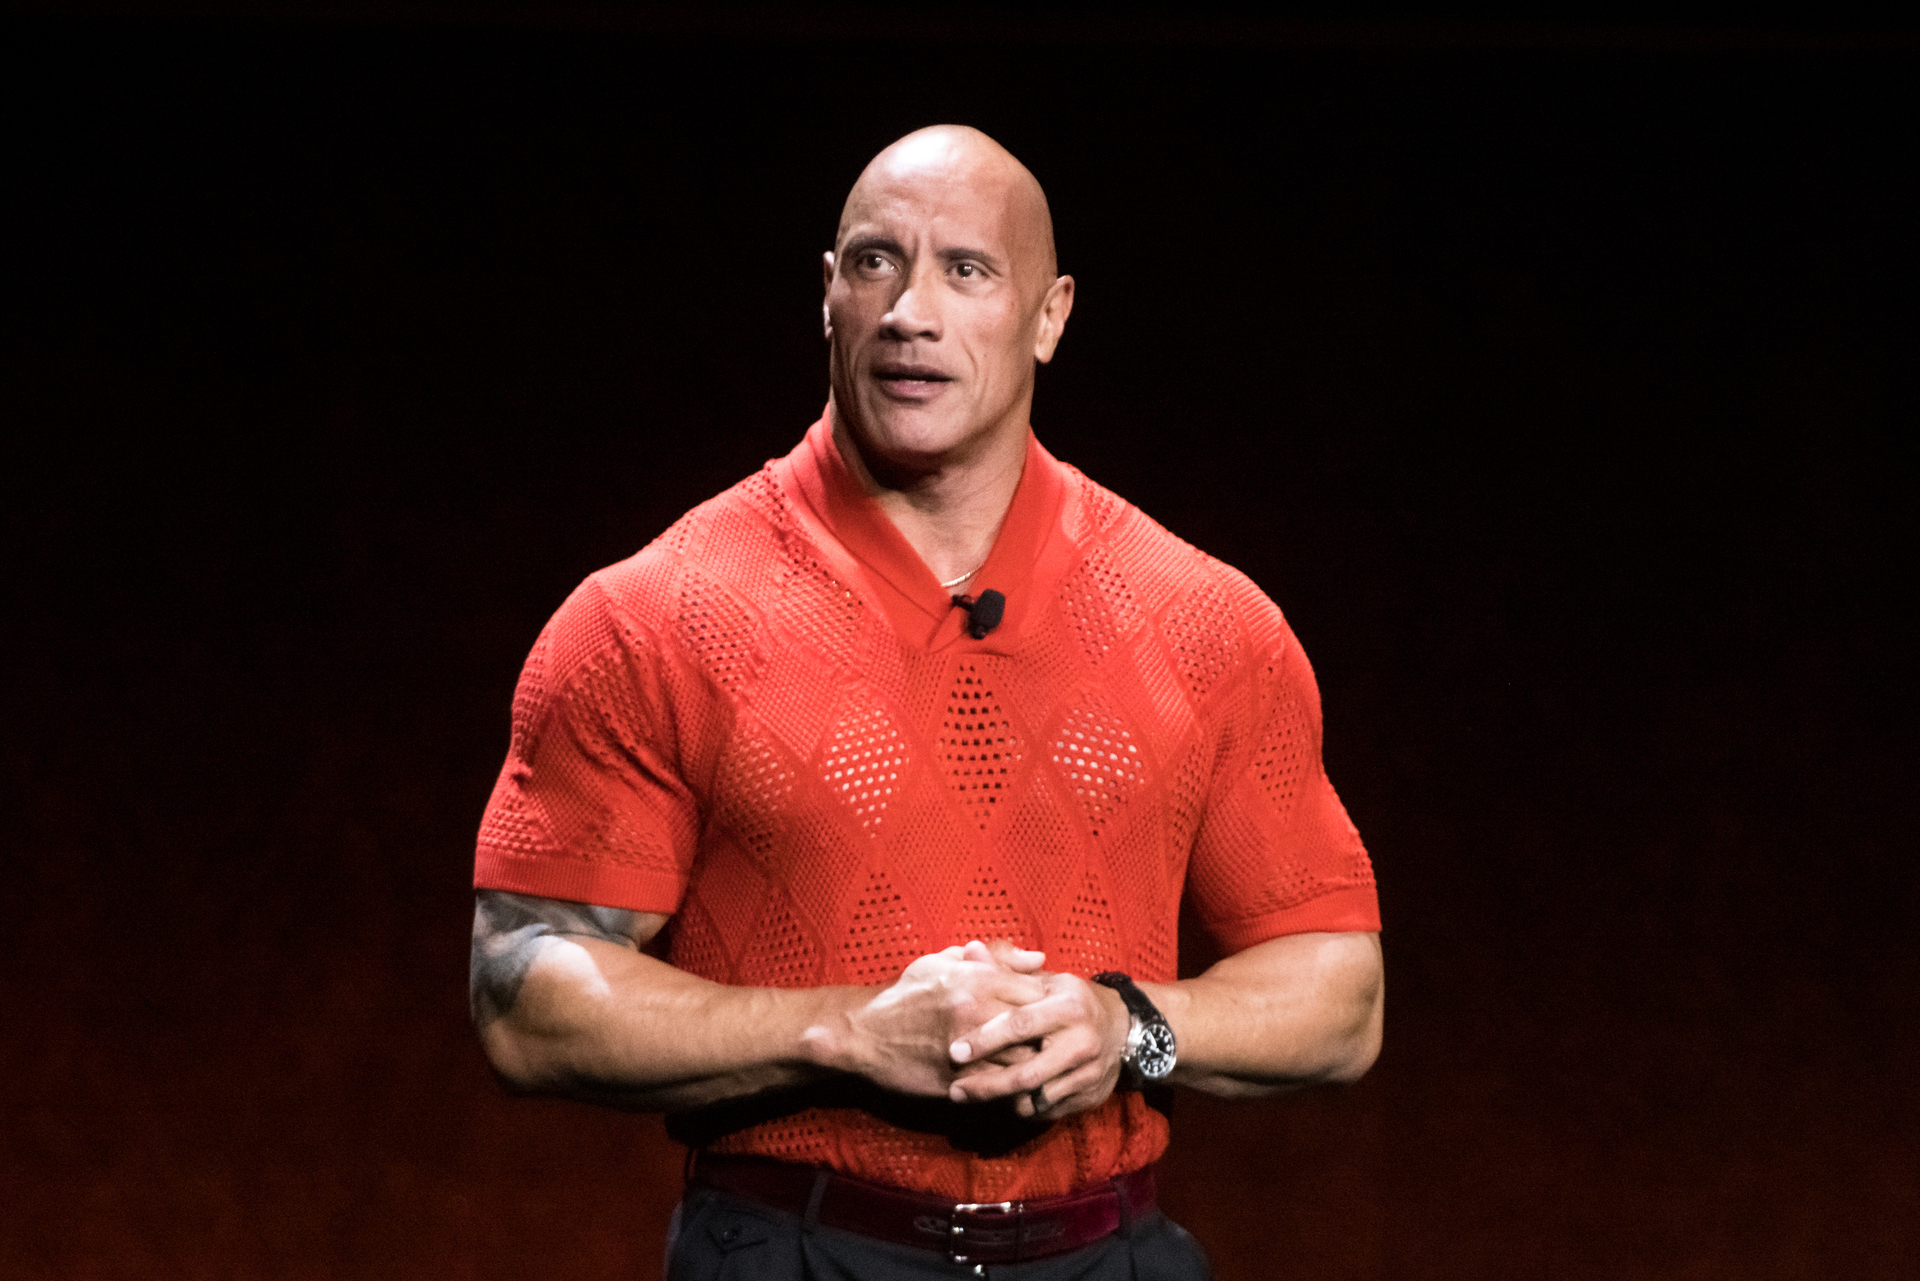 Dwayne 'The Rock' Johnson reveals massive 'cheat meal' including